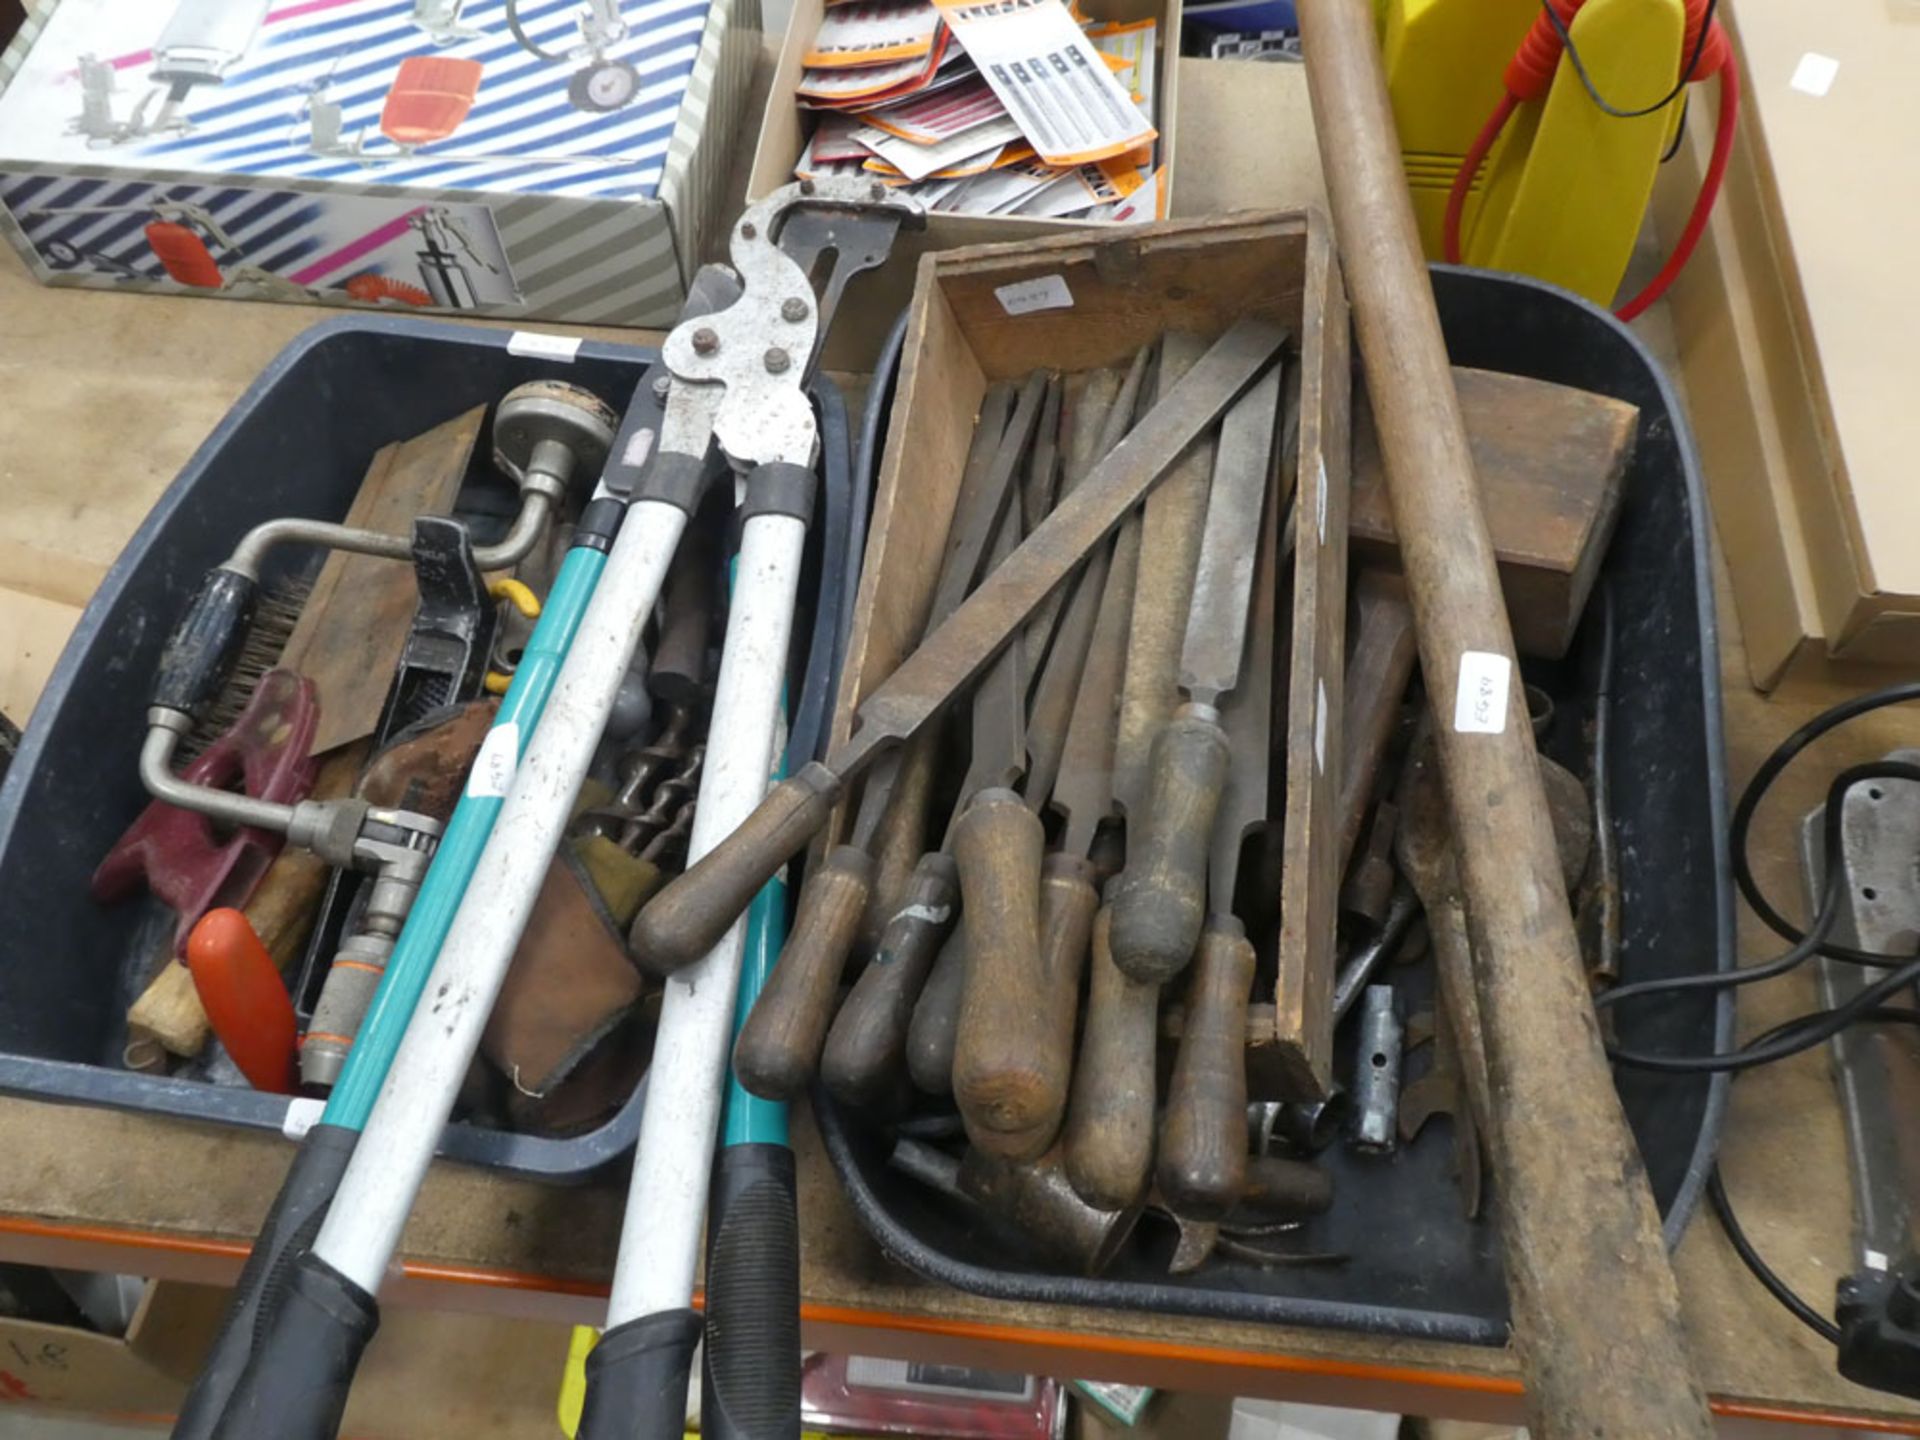 2 plastic crates containing various tools including files, hedge cutters, saws, hand drills,